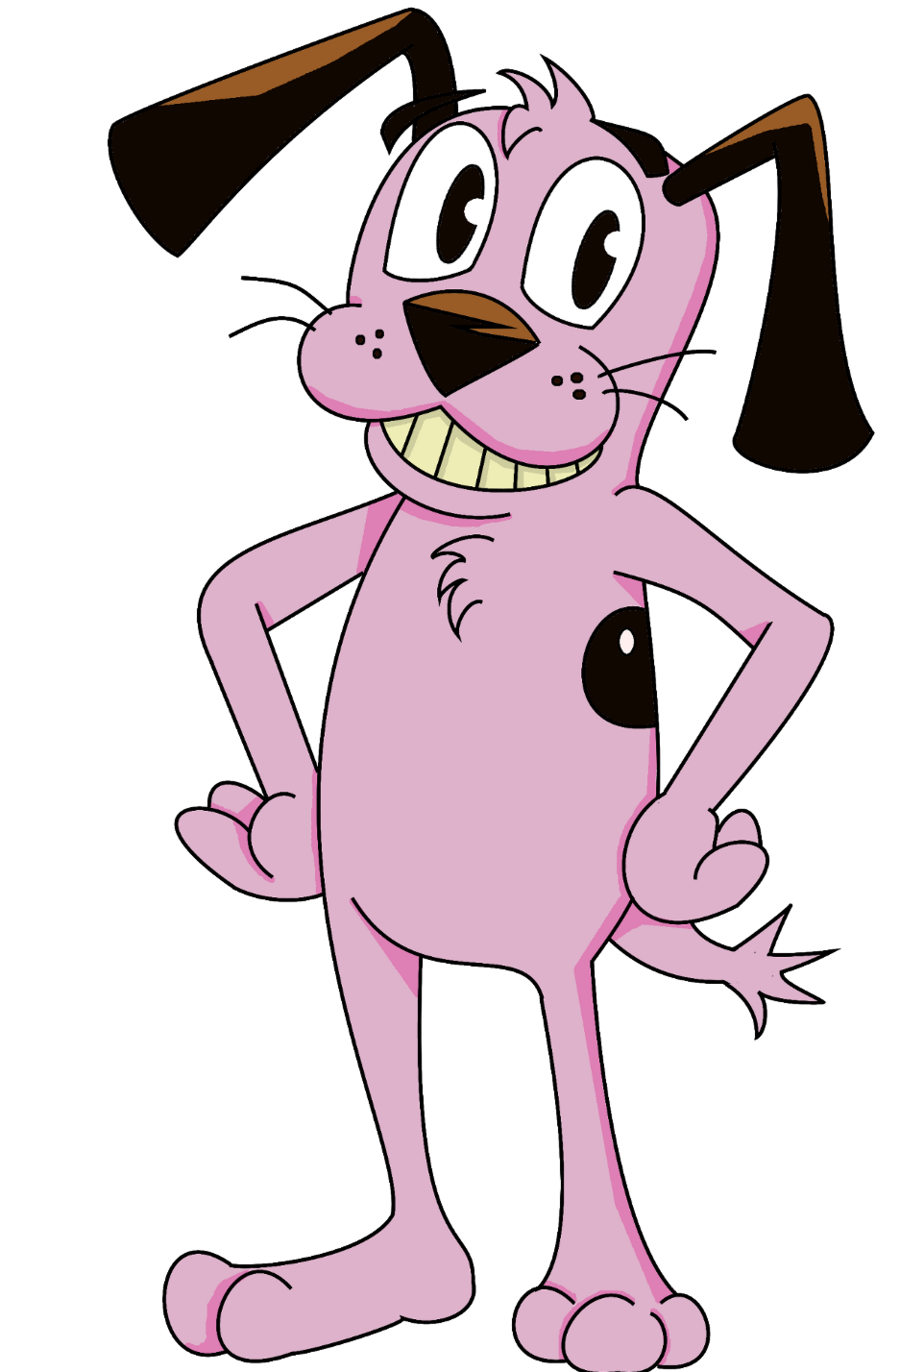 Courage the Cowardly Dog::. by RaeLogan on Clipart library